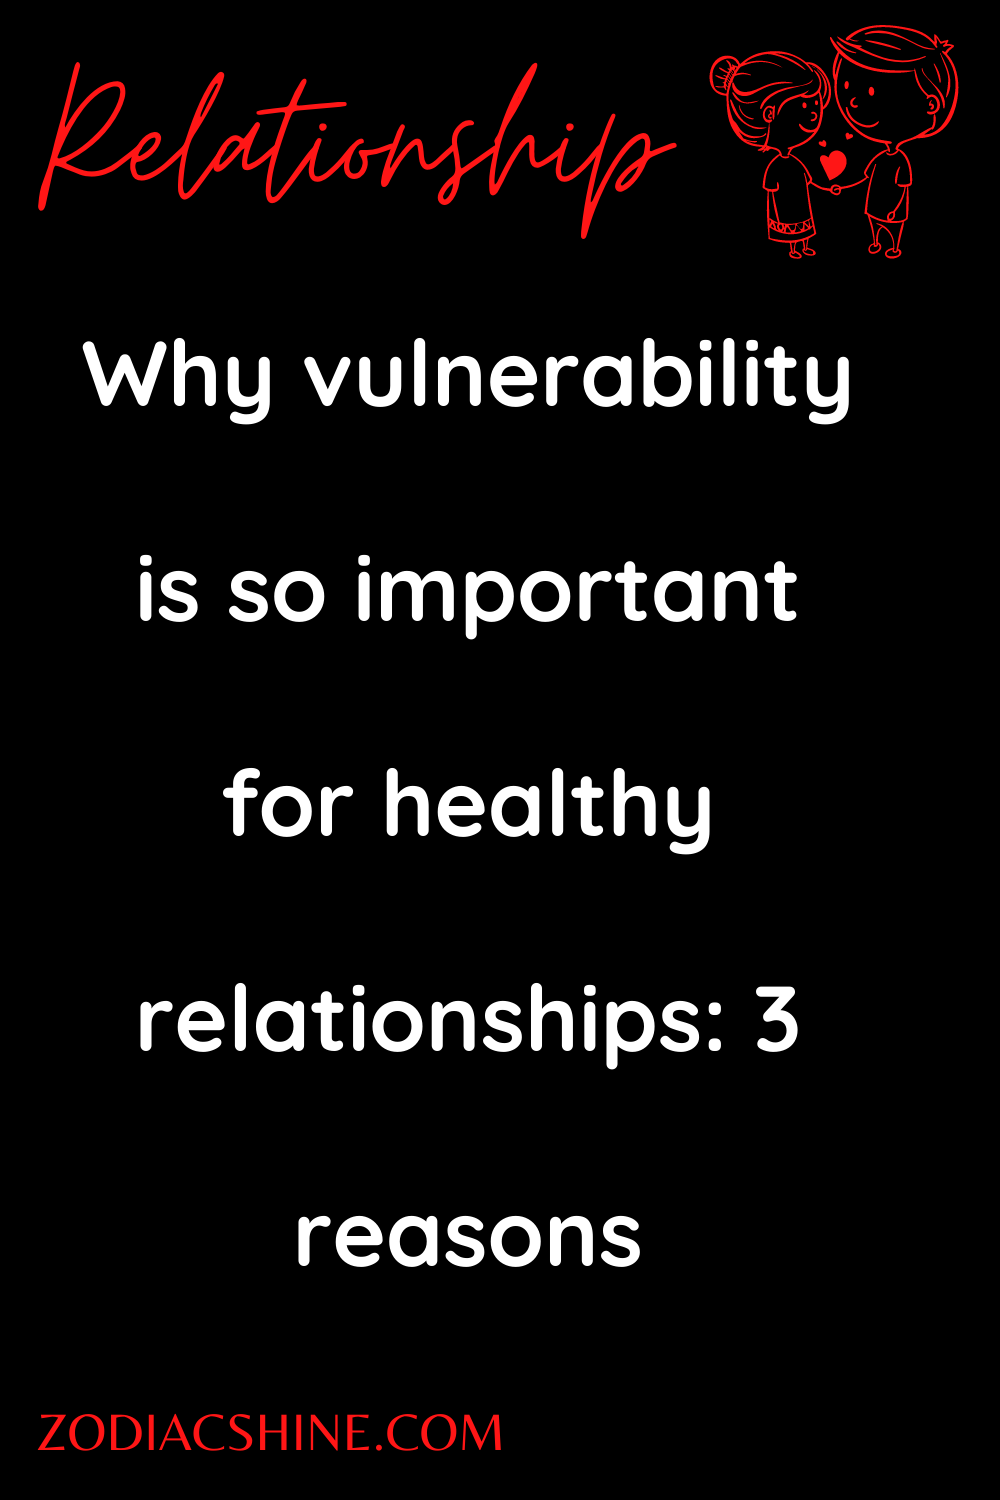 Why vulnerability is so important for healthy relationships: 3 reasons